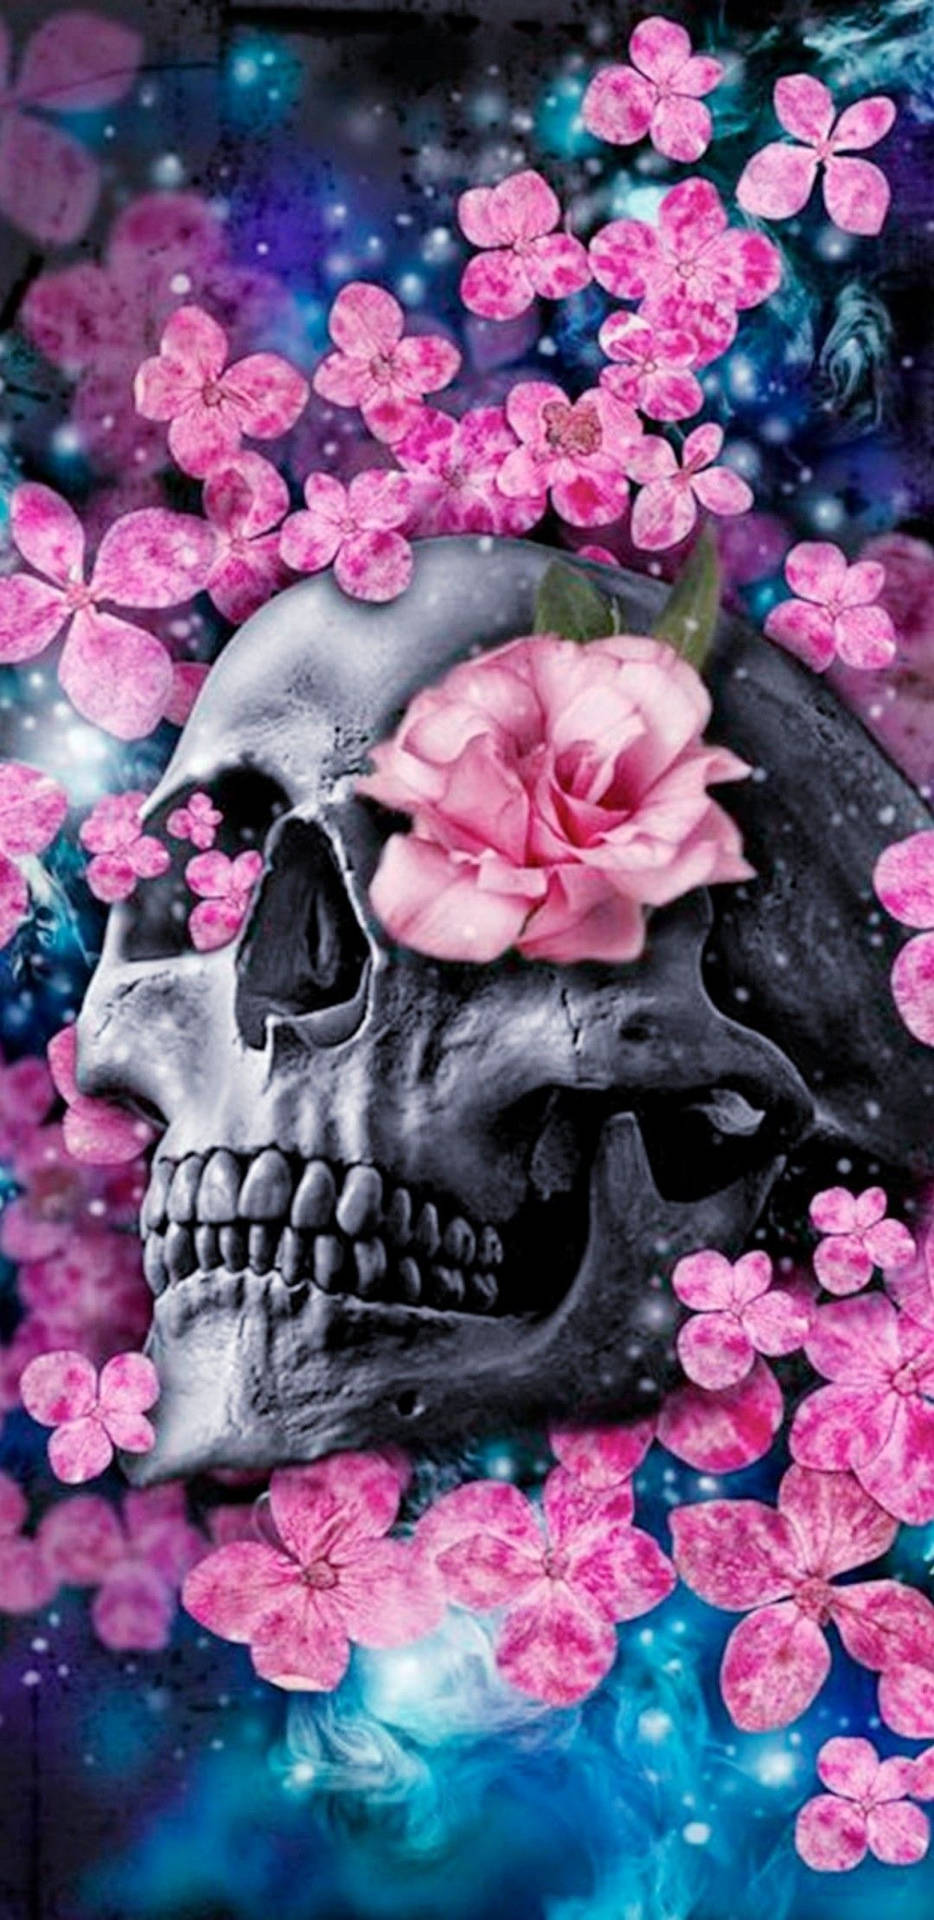 Cute Skeleton And Flowers Aesthetic Photo